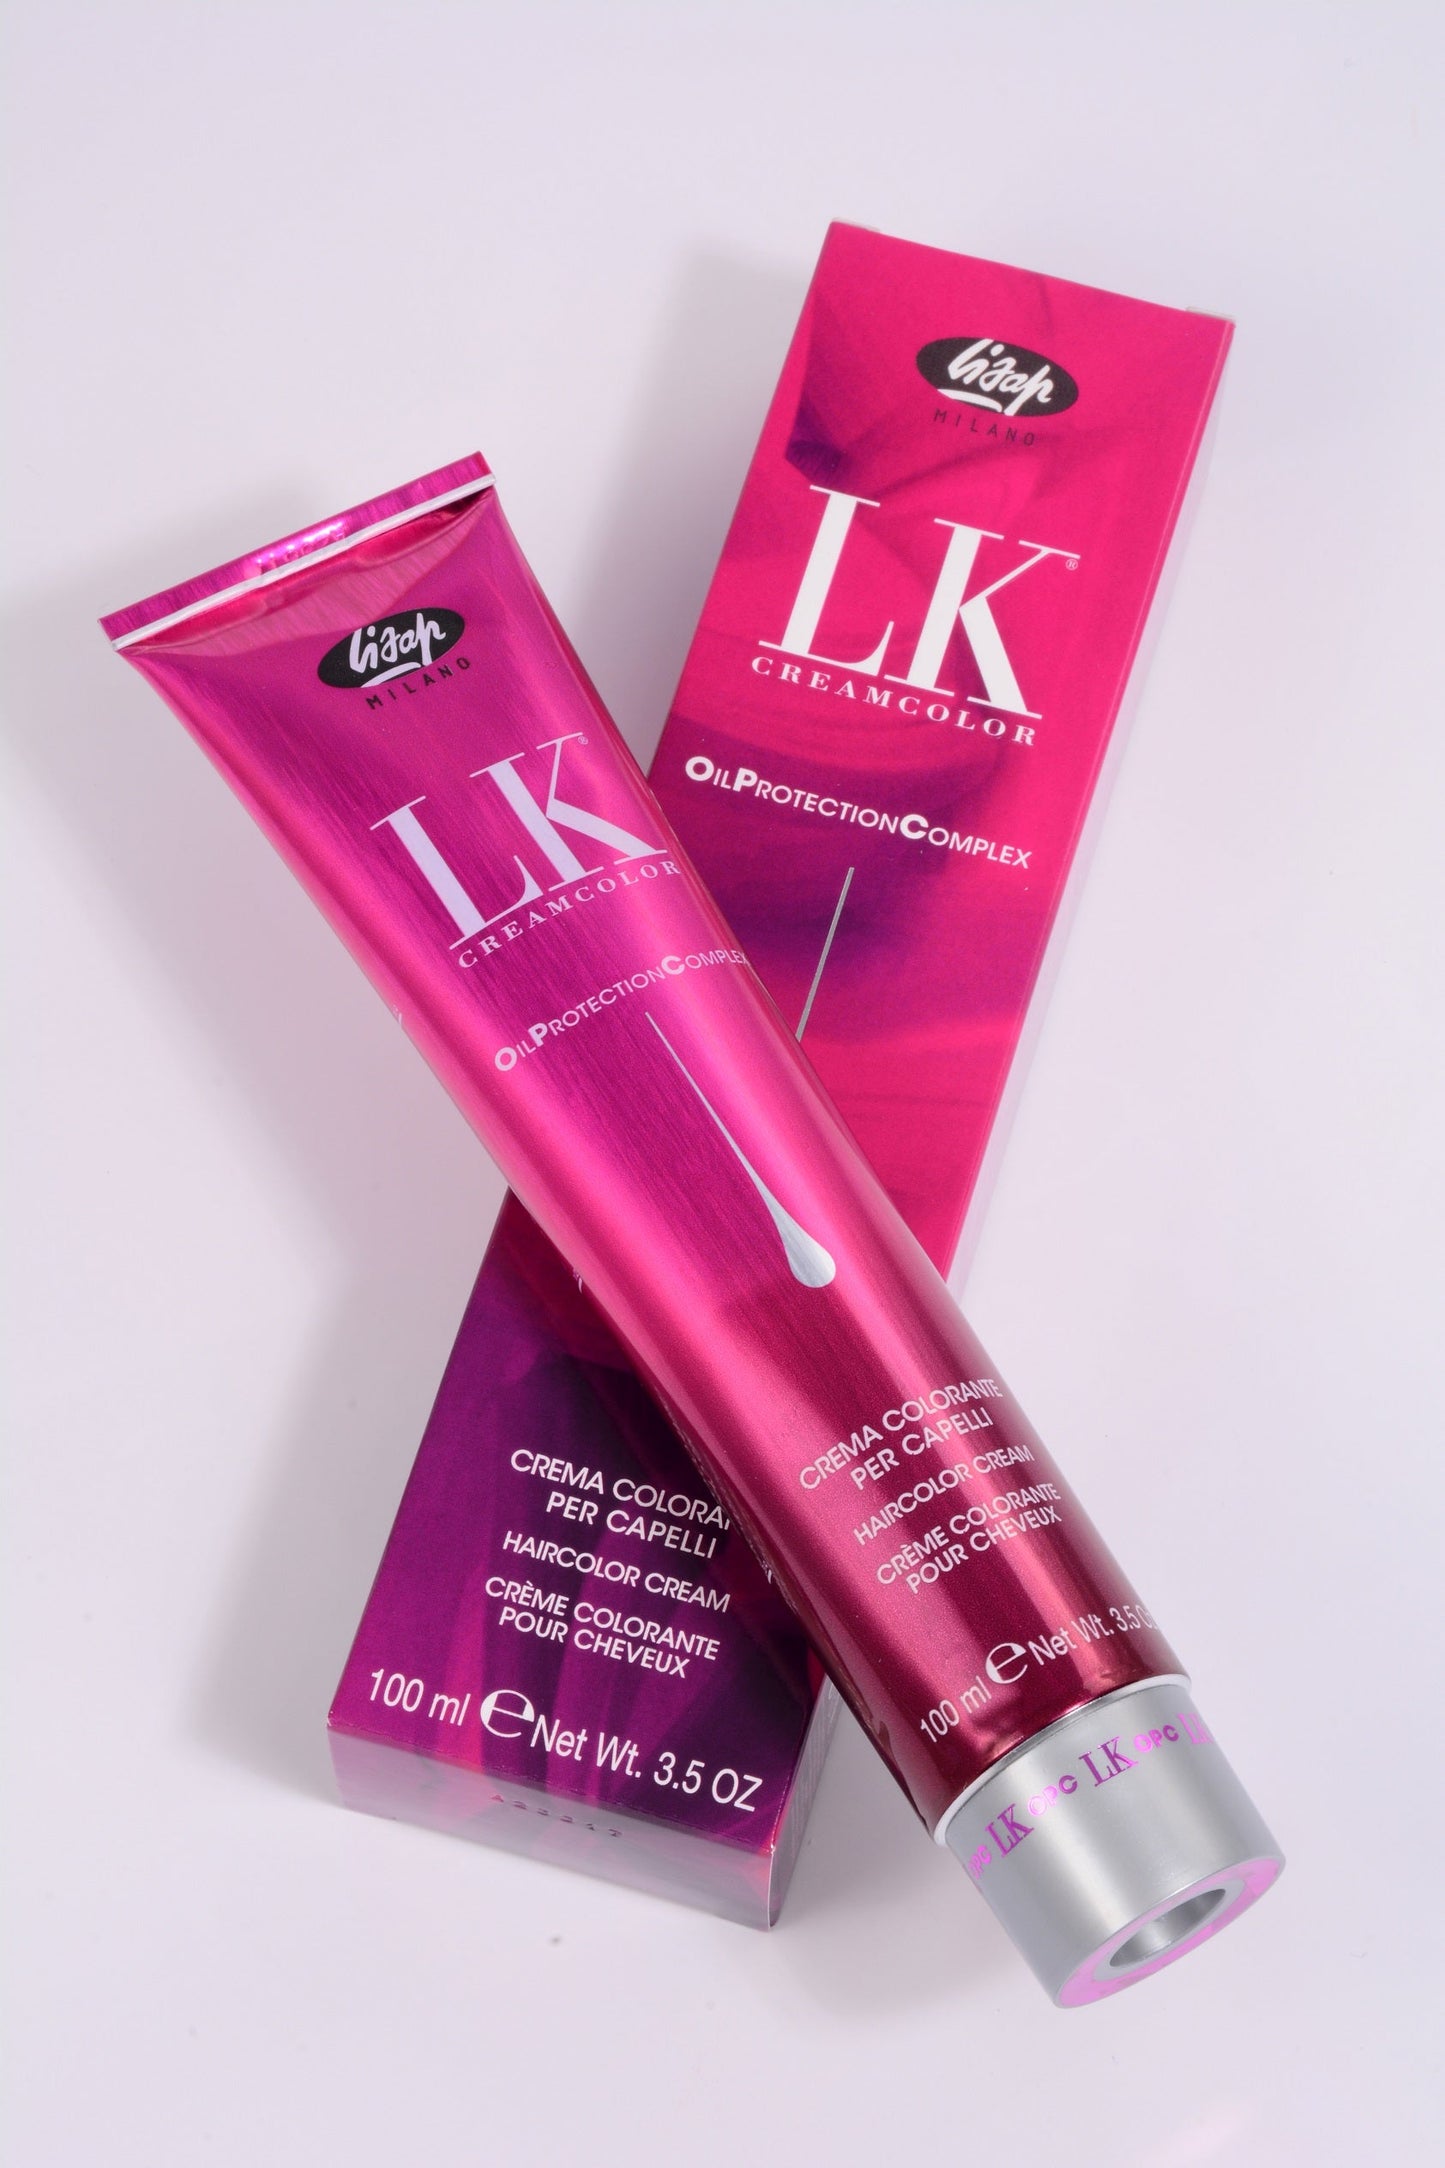 LK Creamcolor 7/82 Oil Protection Complex